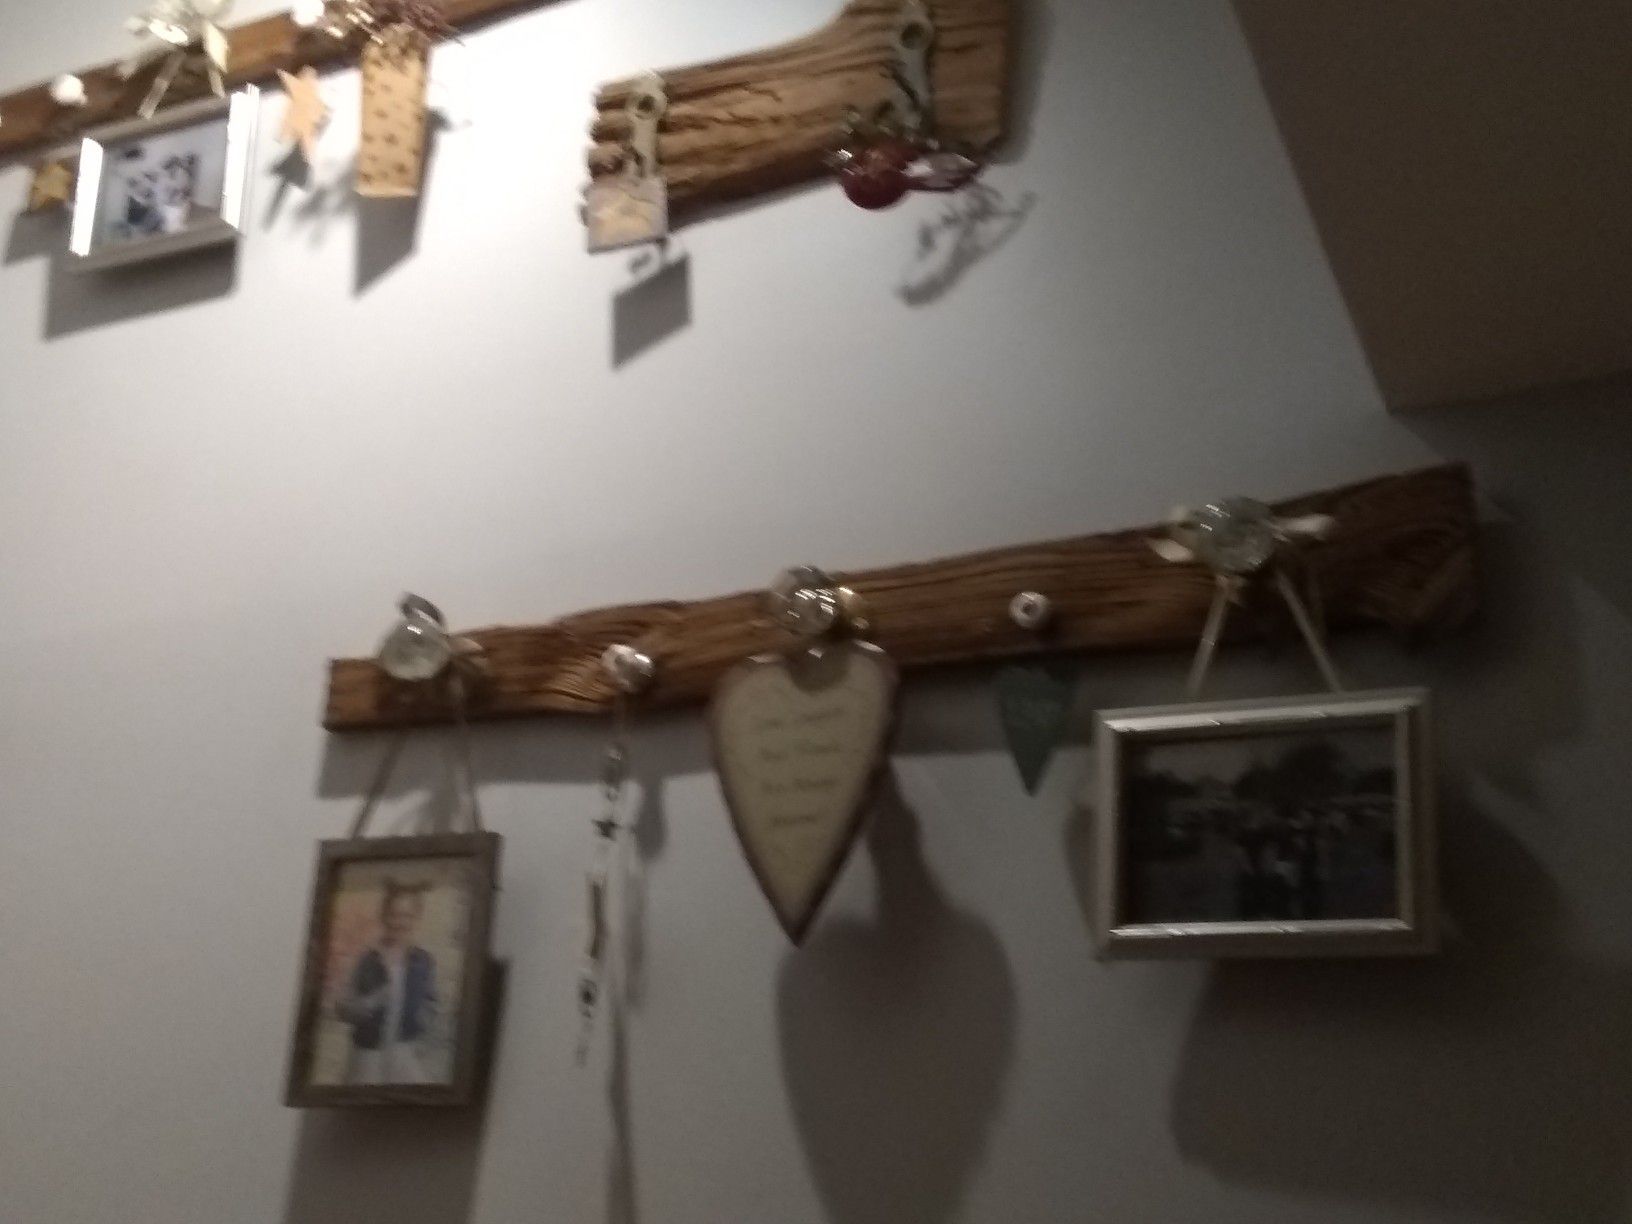 Picture hangers and shelving